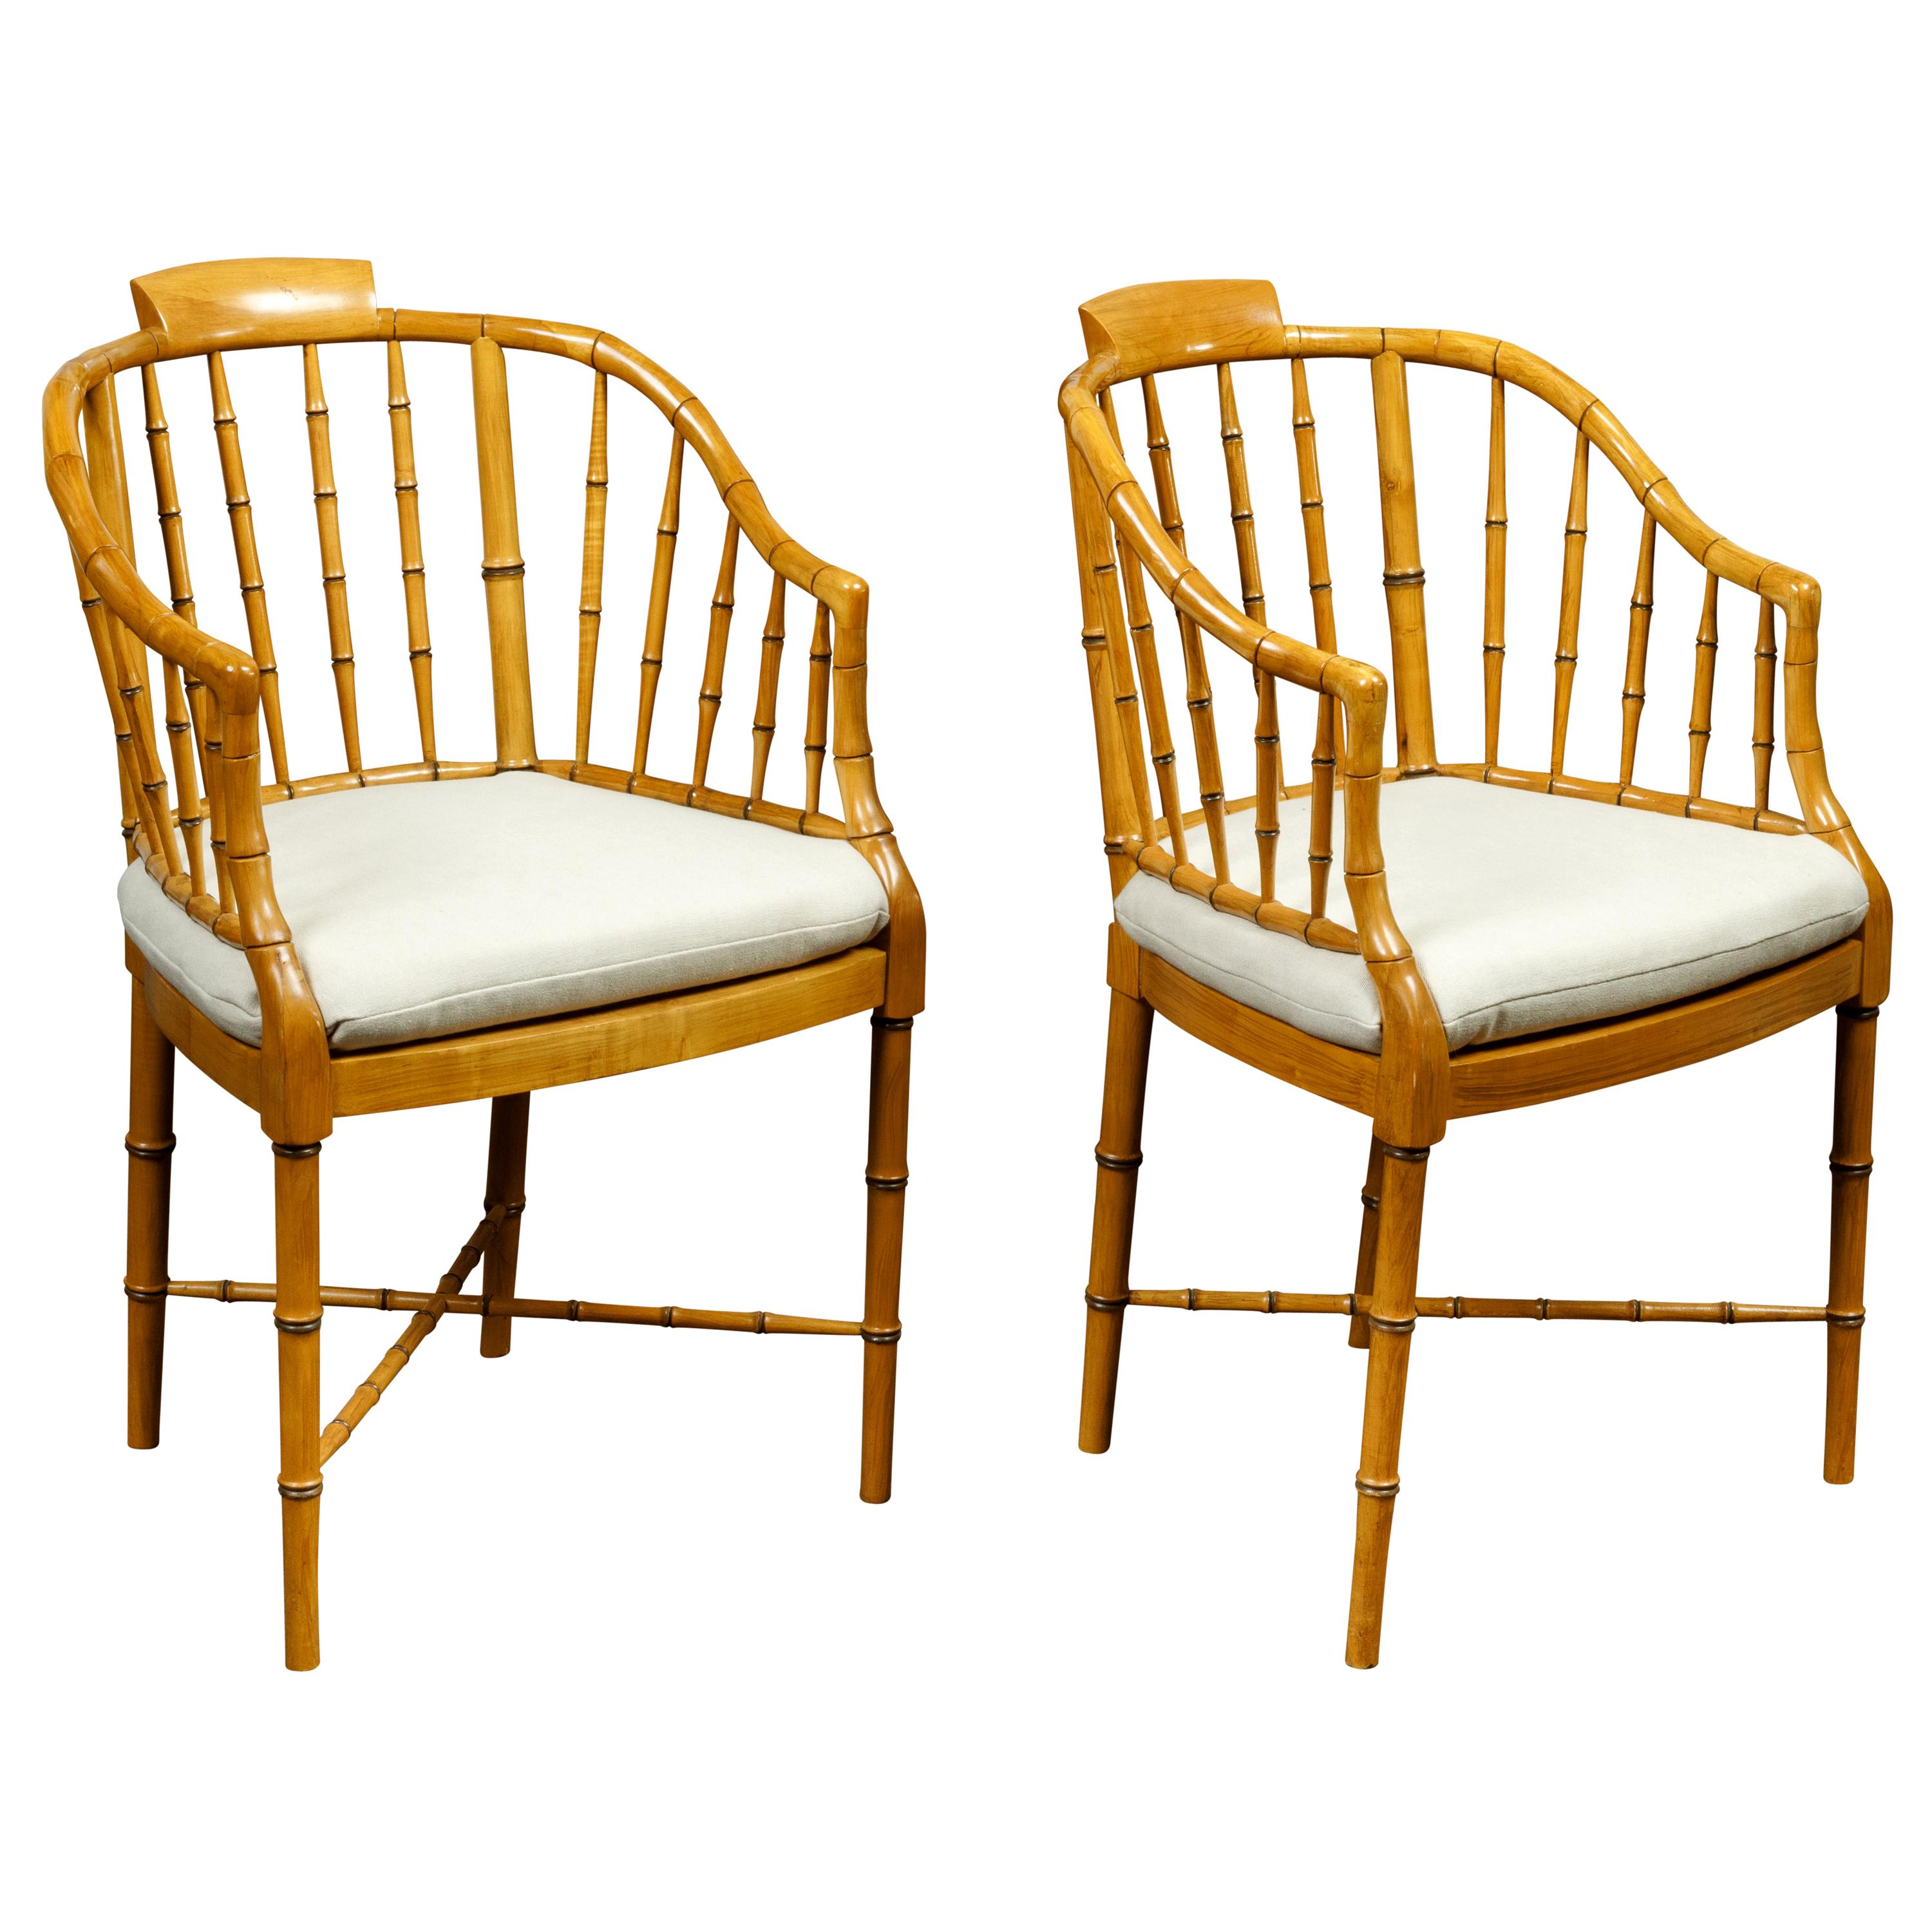 Pair of American Midcentury Baker Style Faux Bamboo Tub Chairs with Cushions